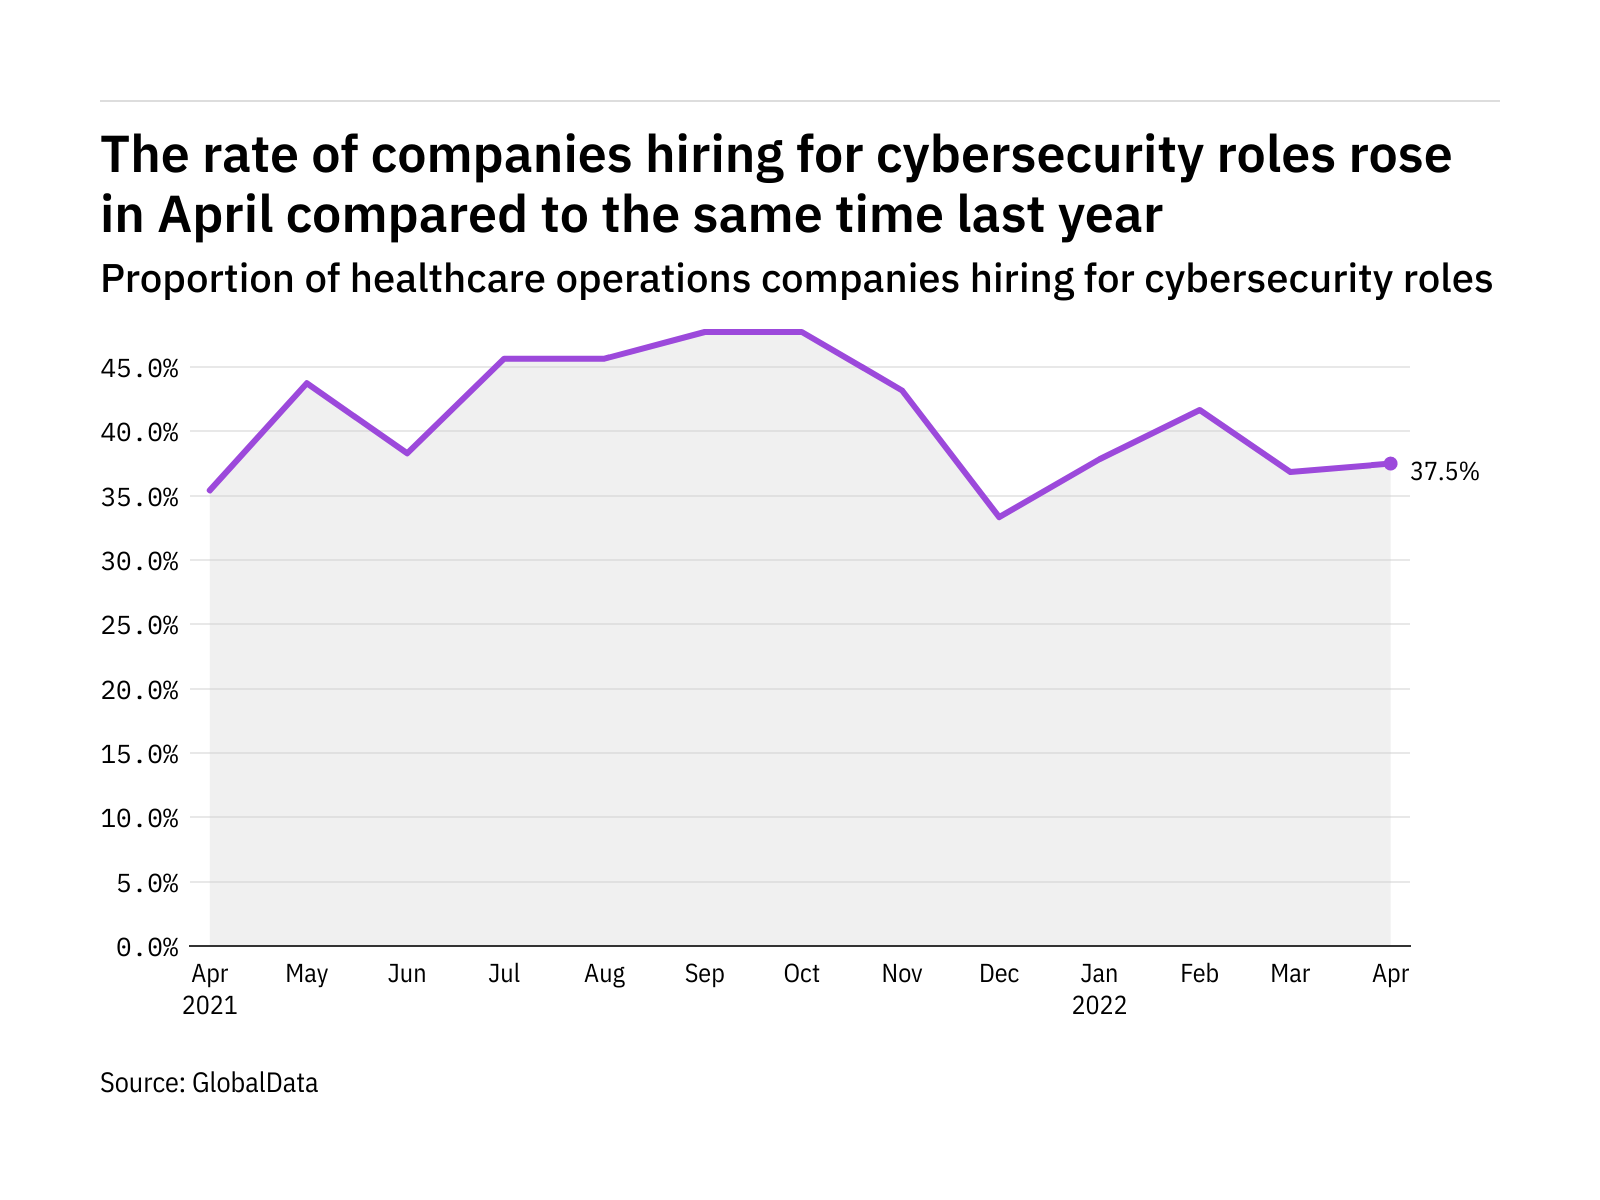 Cybersecurity hiring levels in the healthcare industry rose in April 2022